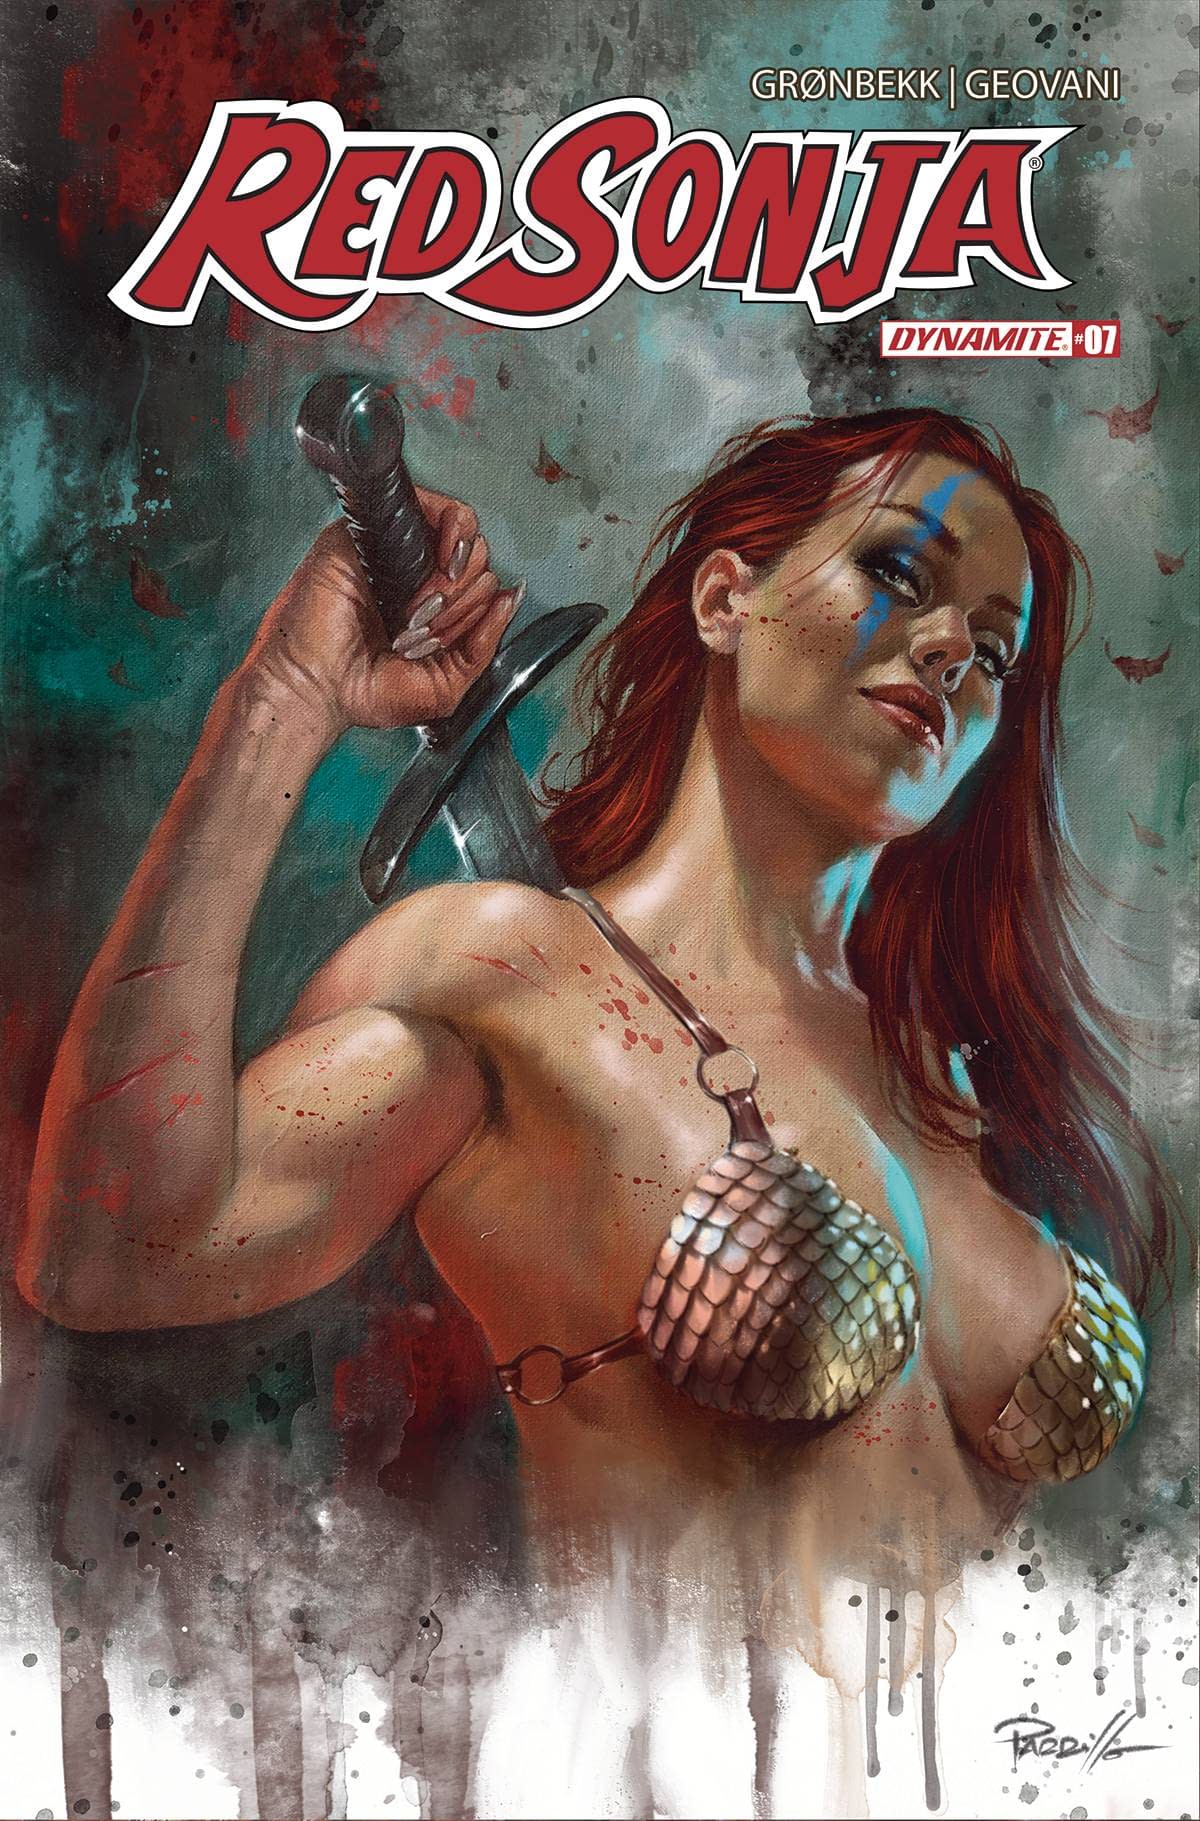 Cover image for Red Sonja #7